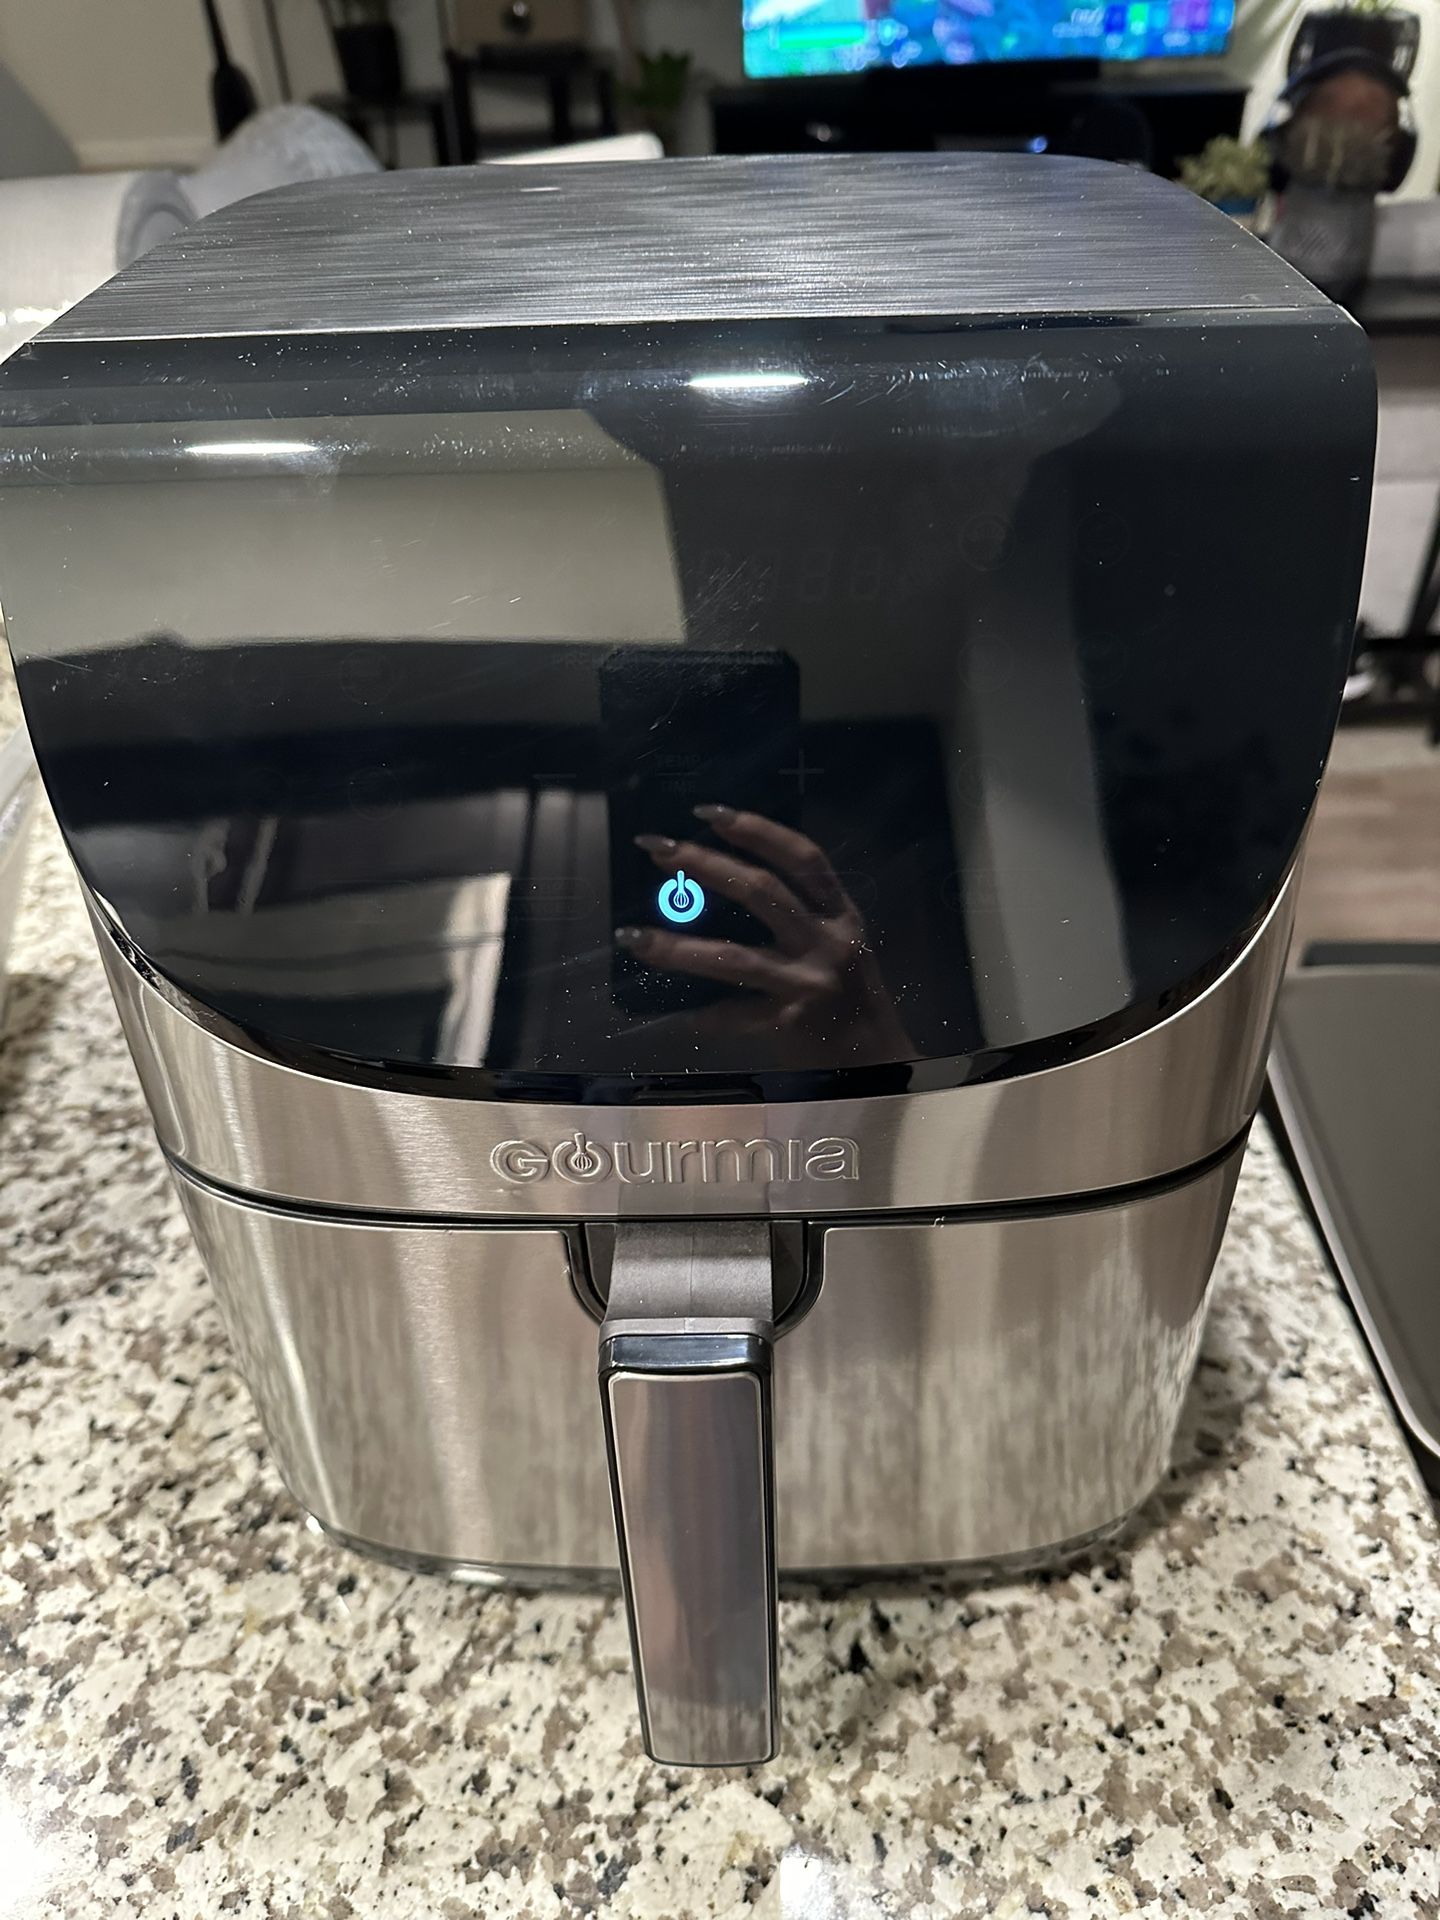 Crux 2.2 Pound Touchscreen Air Convection Fryer for Sale in Desert Hot  Springs, CA - OfferUp